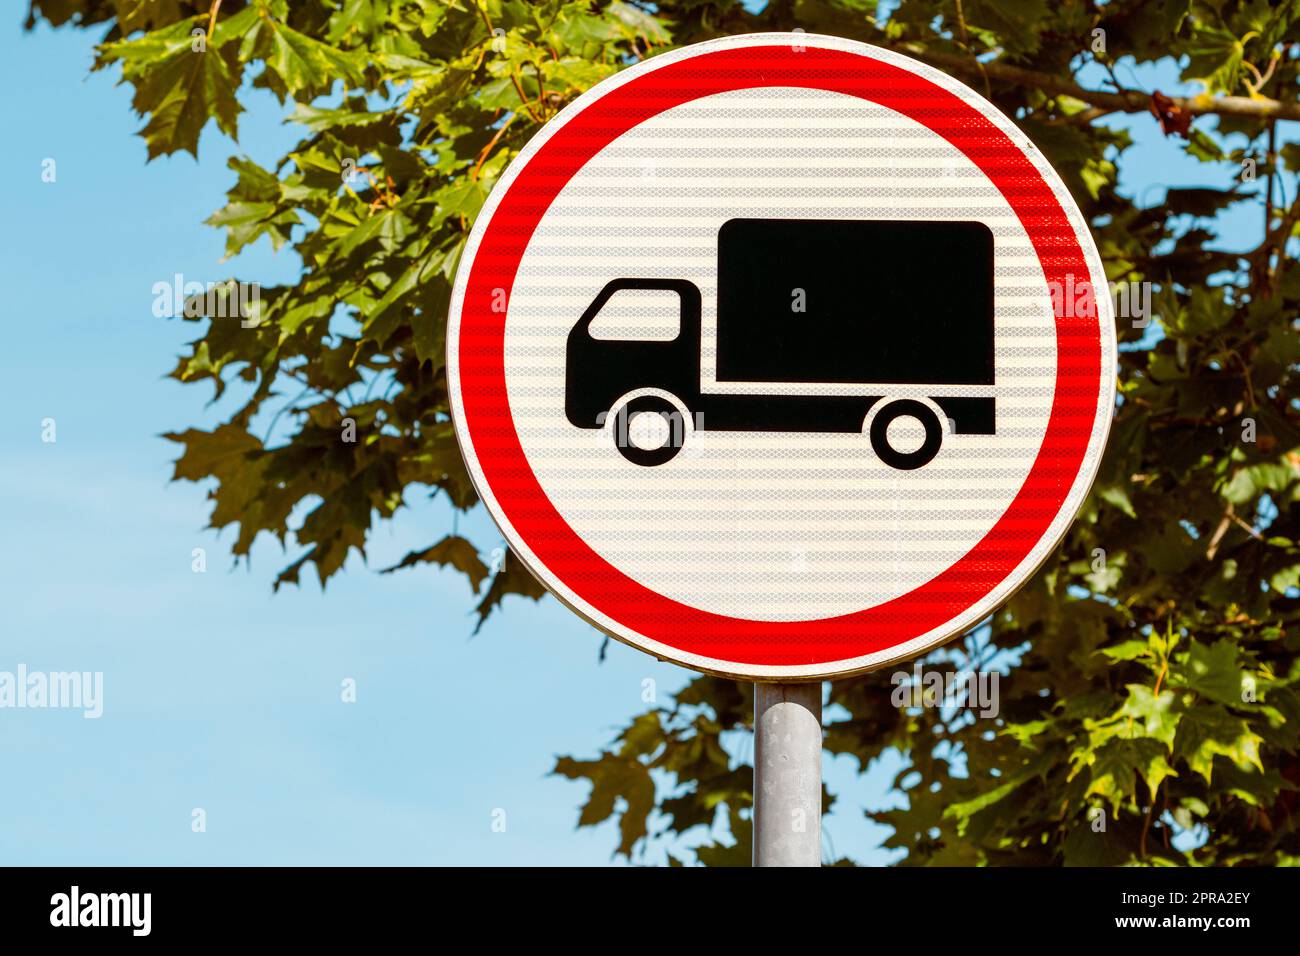 Red and white round traffic sign with black cargo truck indicating No entry for trucks Stock Photo